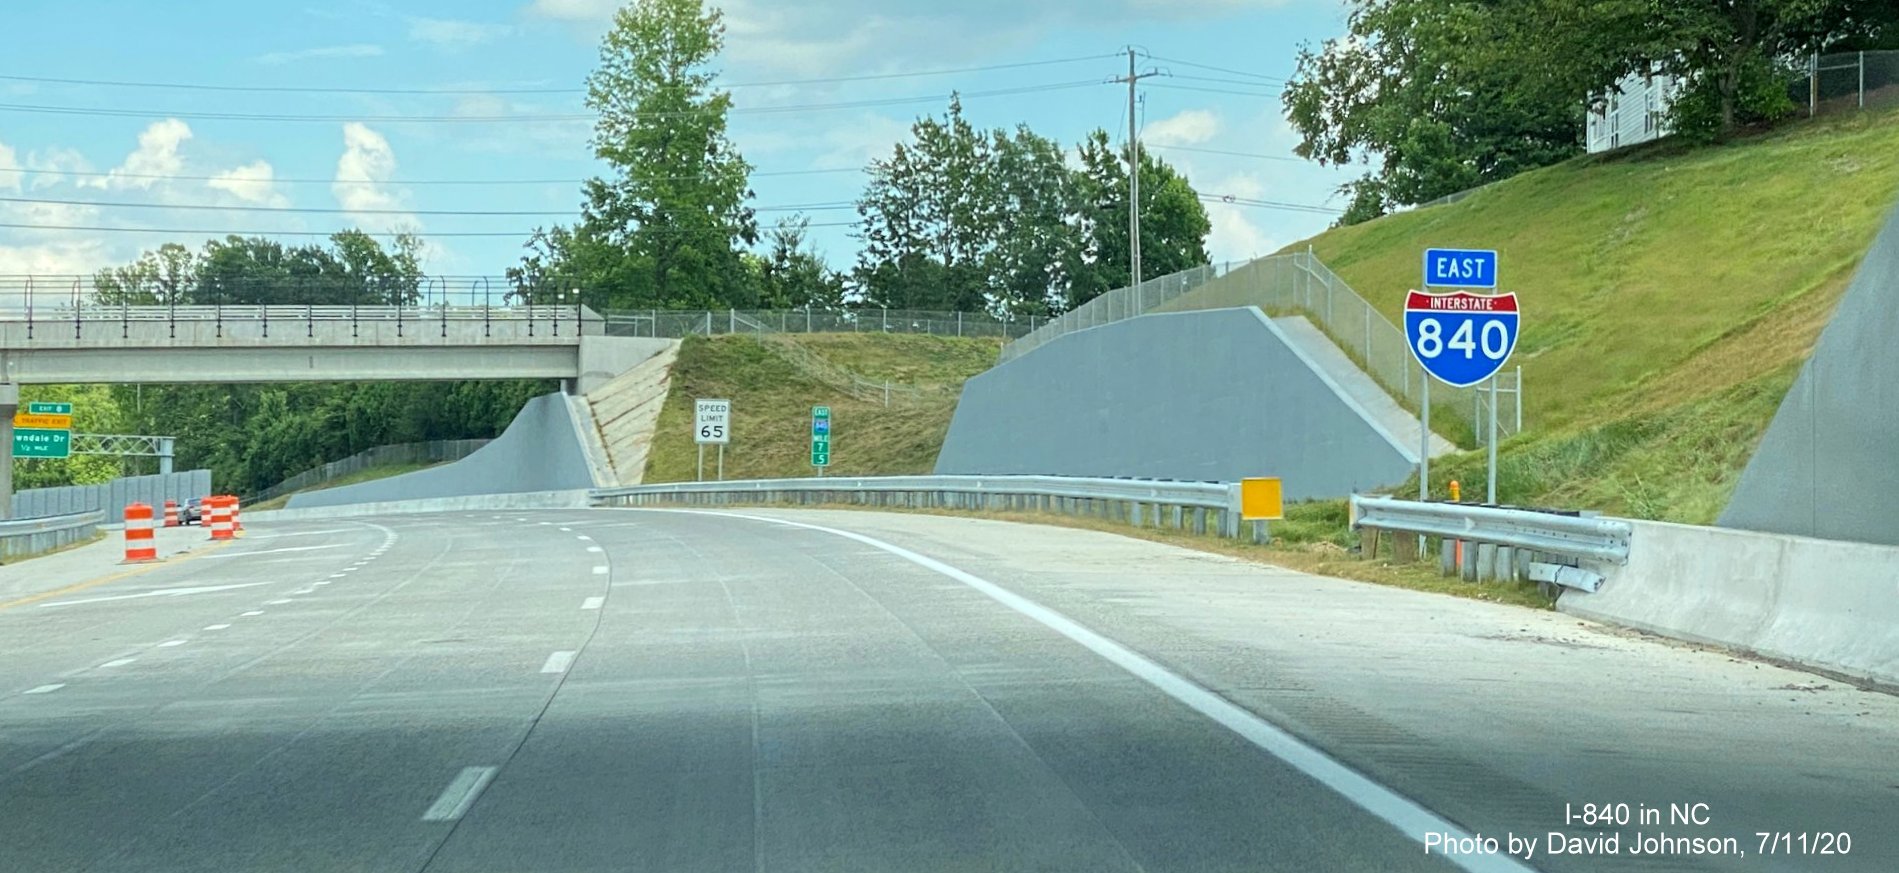 Image of last East I-840 reassurance marker prior to current end of Greensboro Urban Loop at Lawndale Drive, by David Johnson July 2020